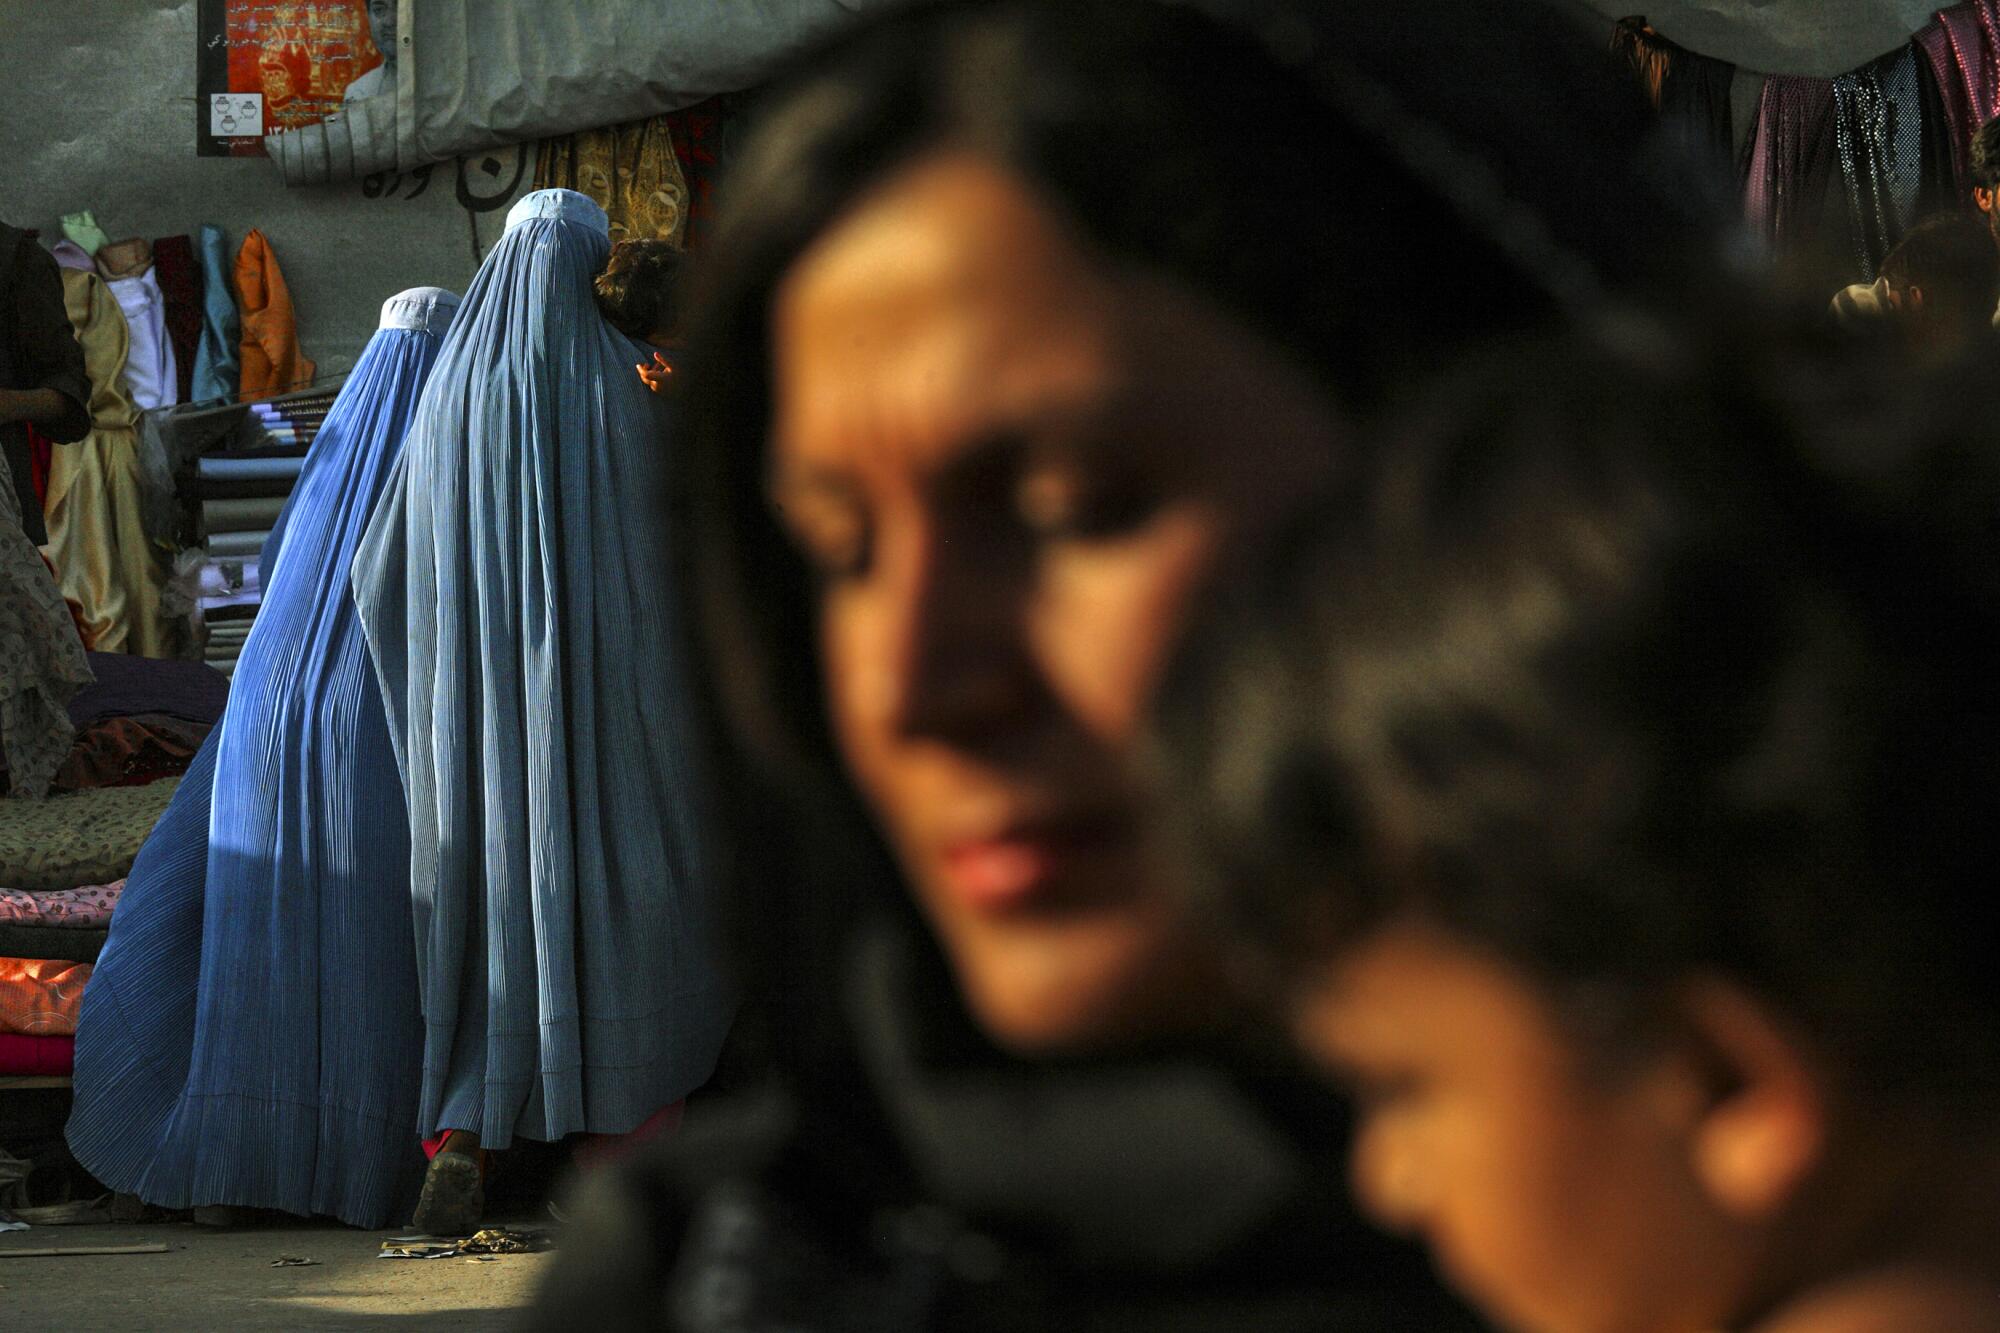 Life for the women of Afghanistan has changed dramatically since the fall of the Taliban in 2001. 